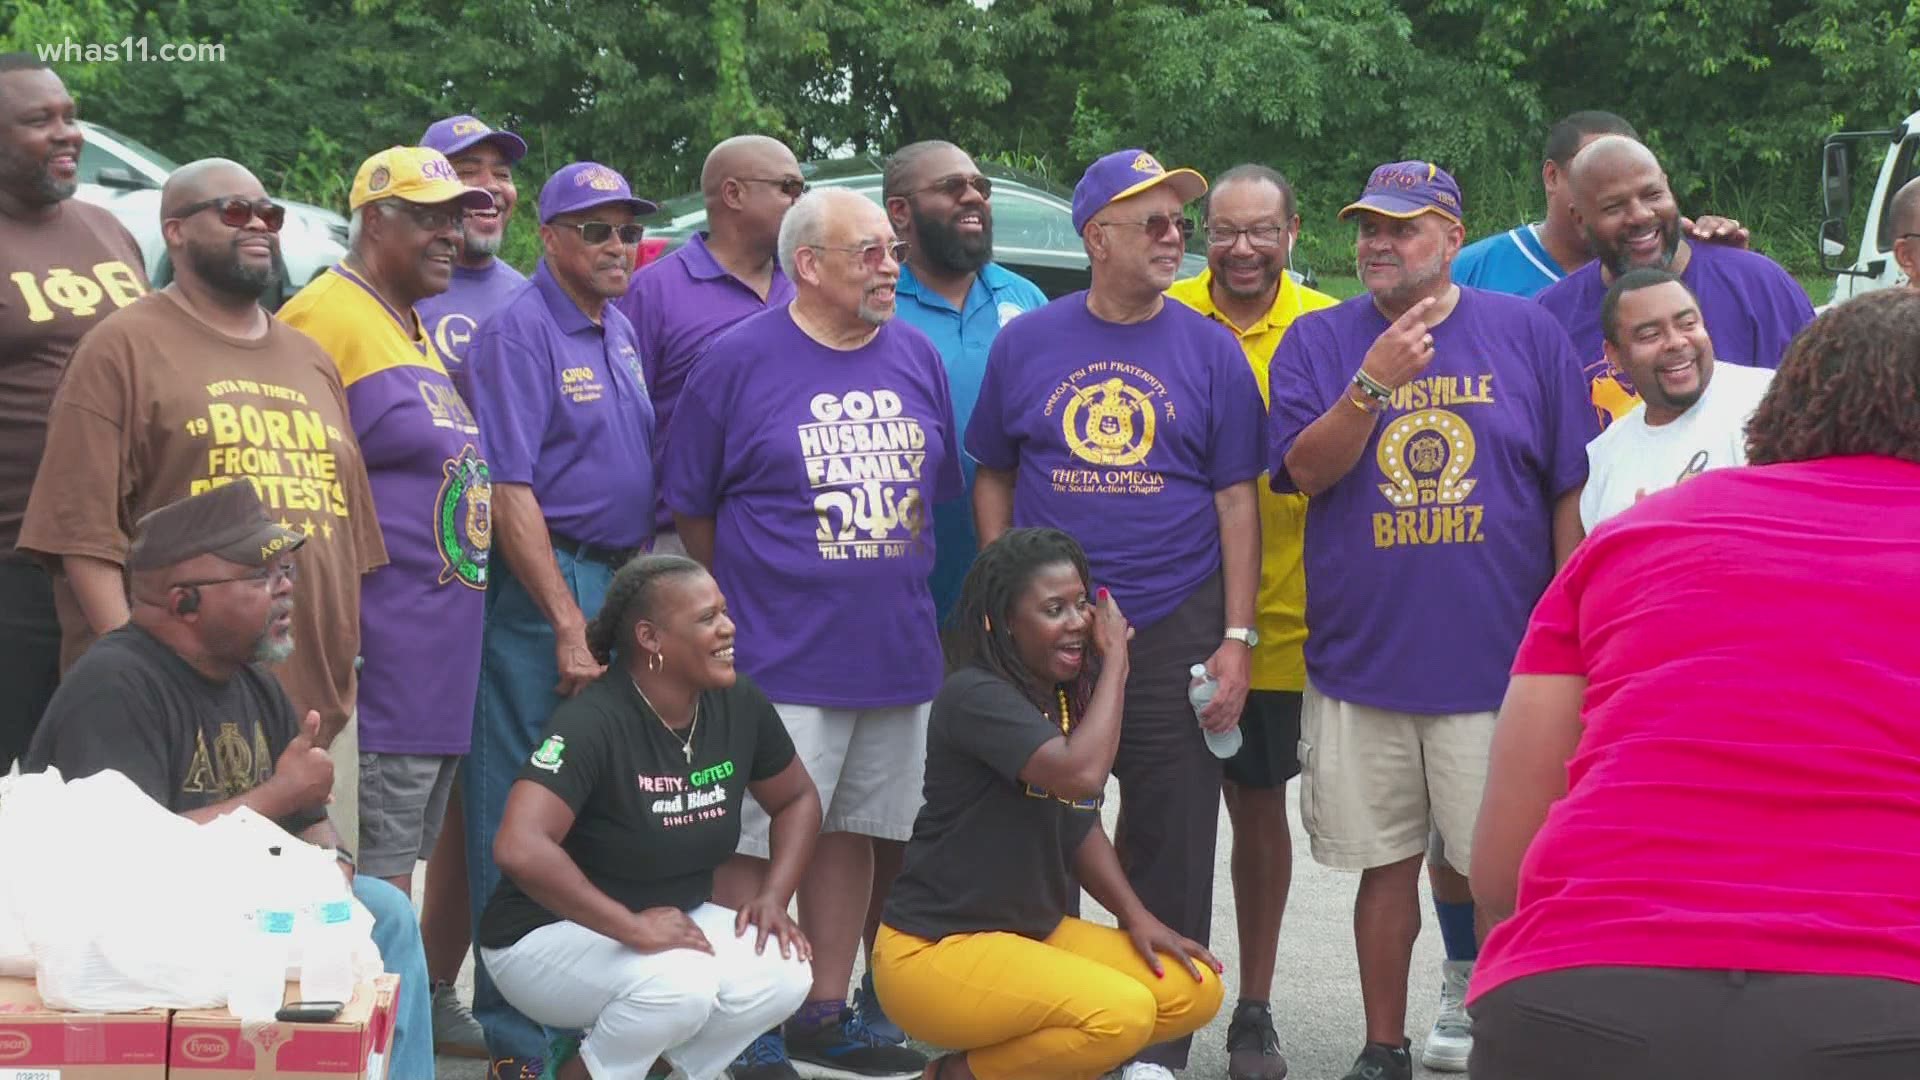 Volunteers from the National Pan-Hellenic Council delivered fresh fruits, veggies and frozen meat to the community as part of Juneteenth services.